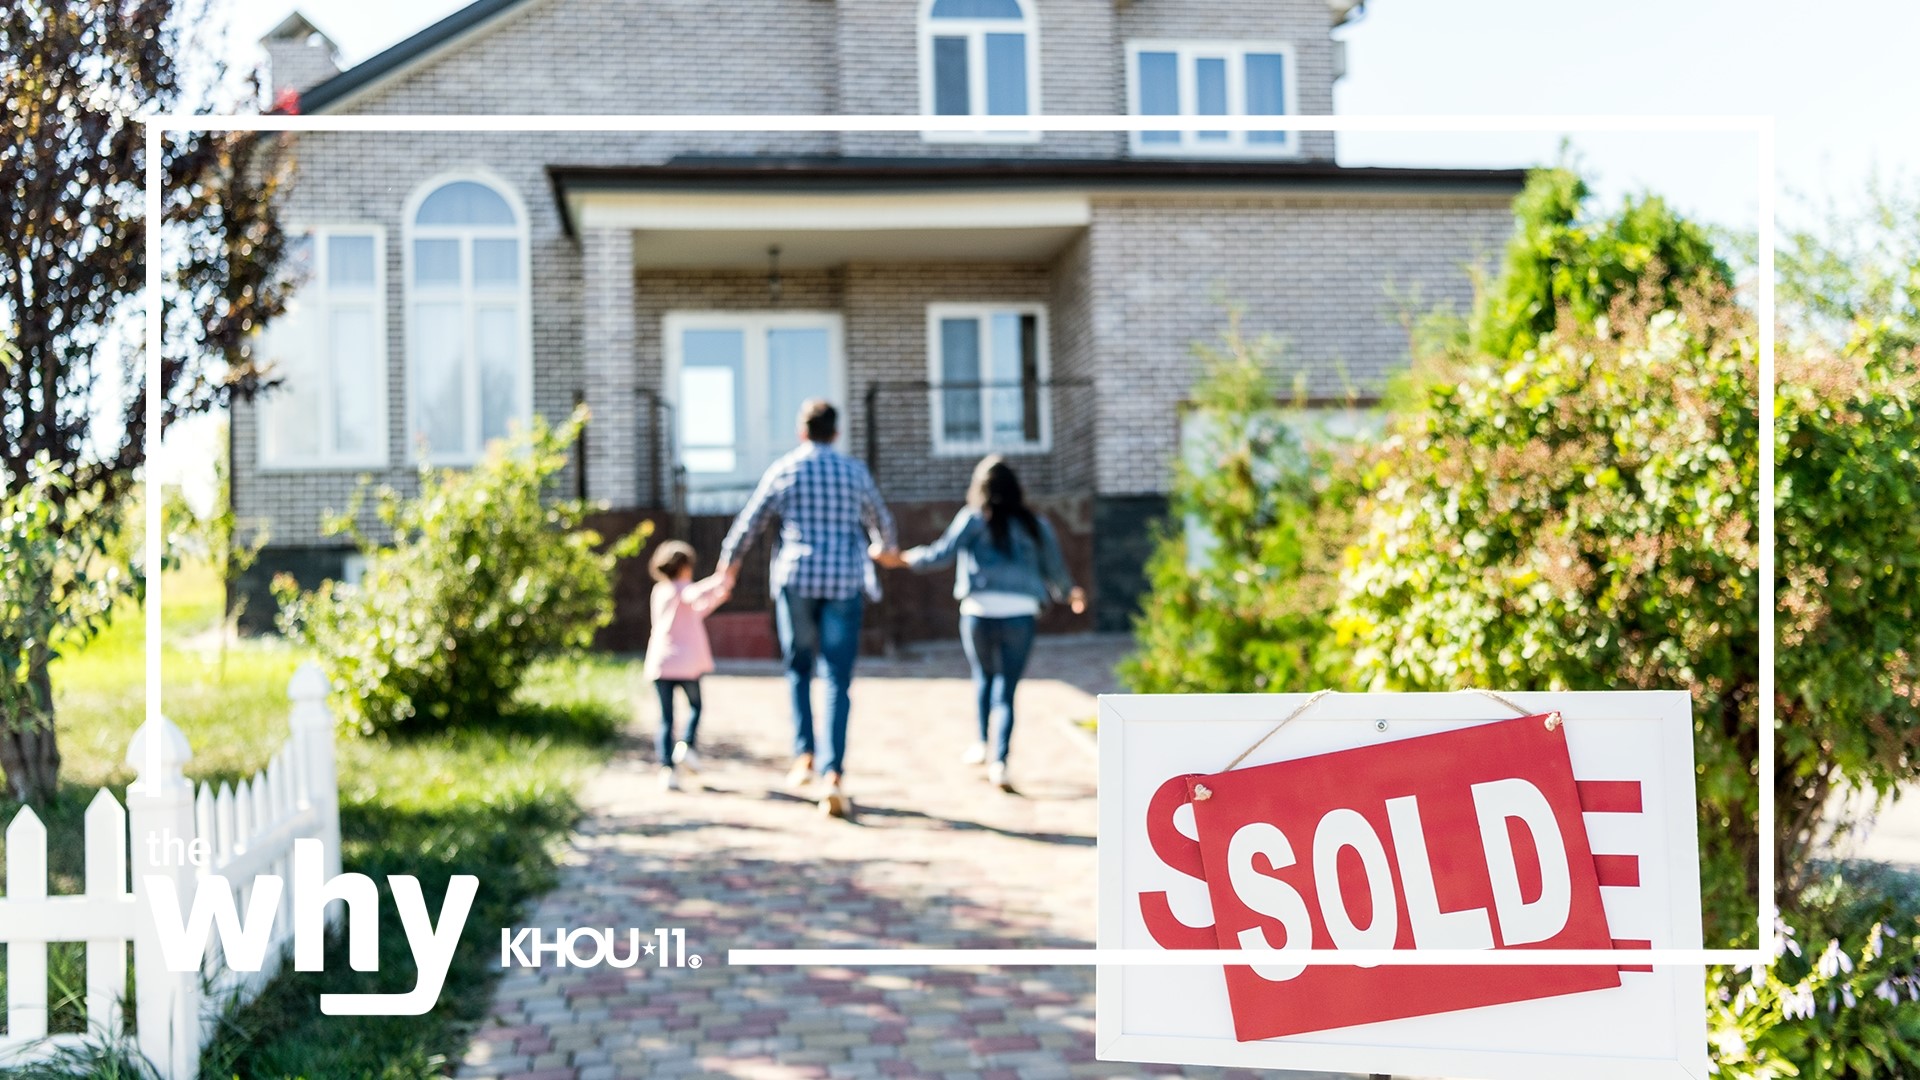 Home values are way up this year, but you can lower your assessment.